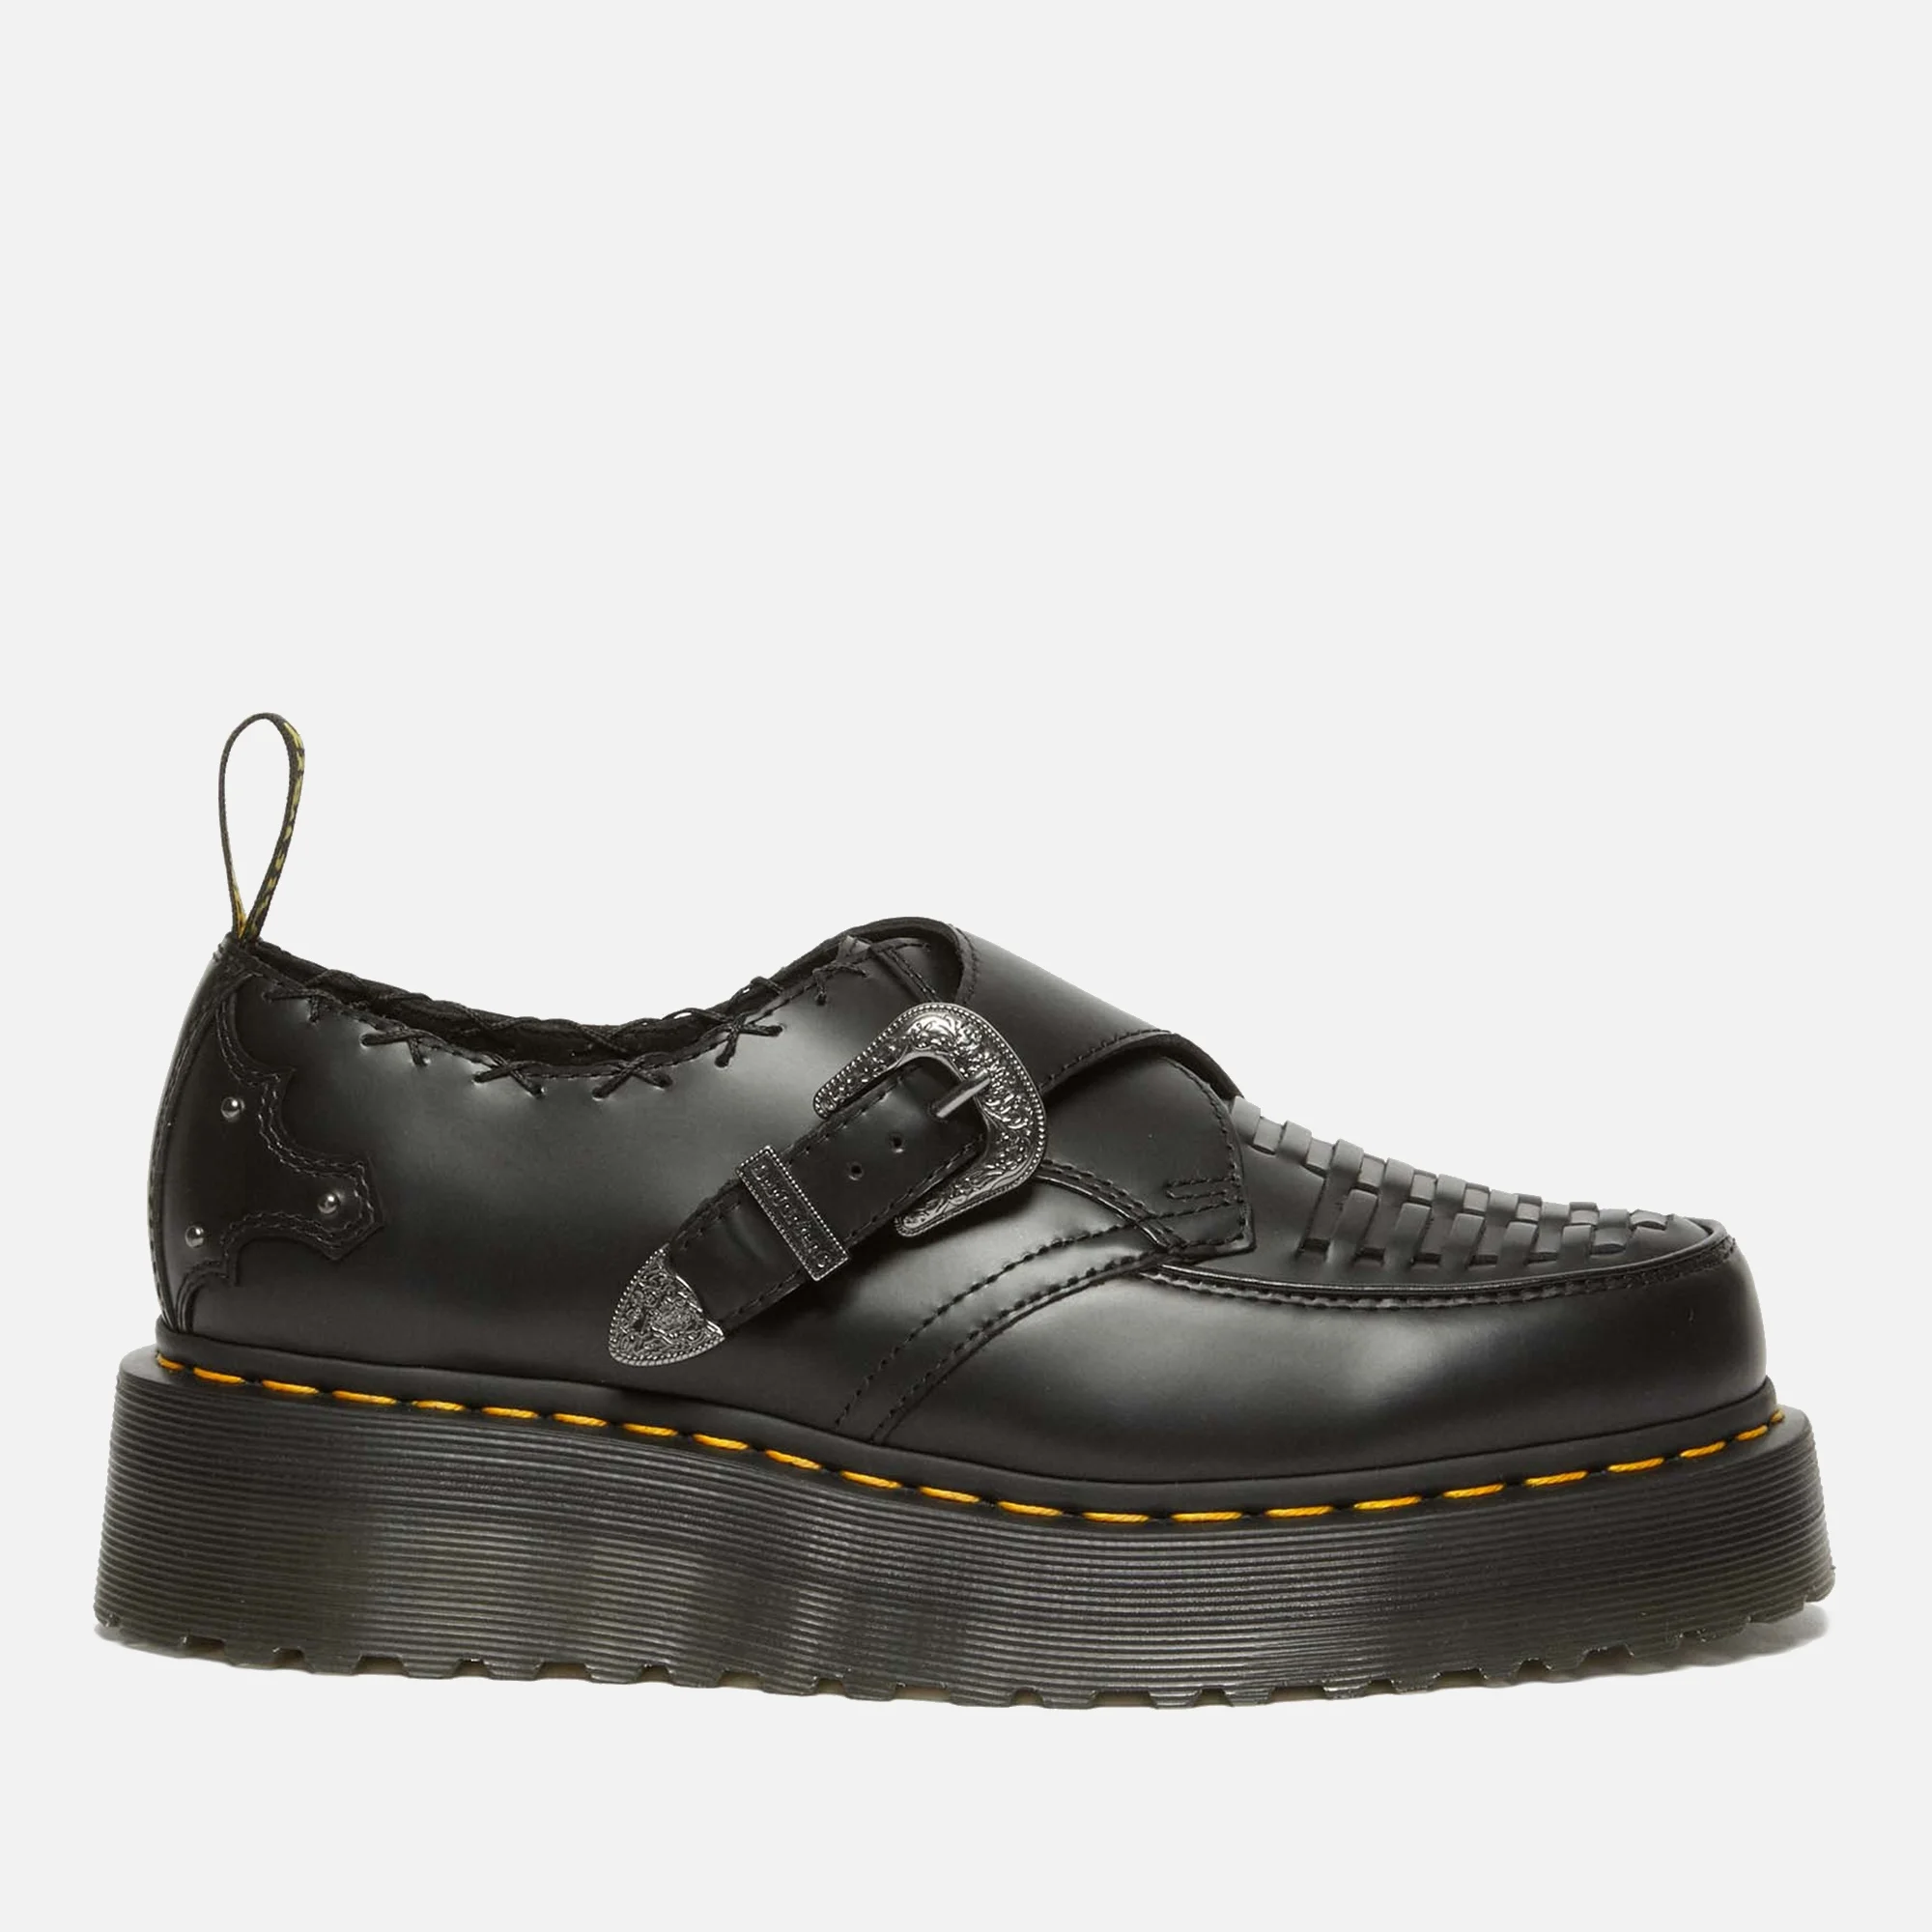 Dr. Martens Ramsey Quad Leather Creepers - UK 5 Image 1